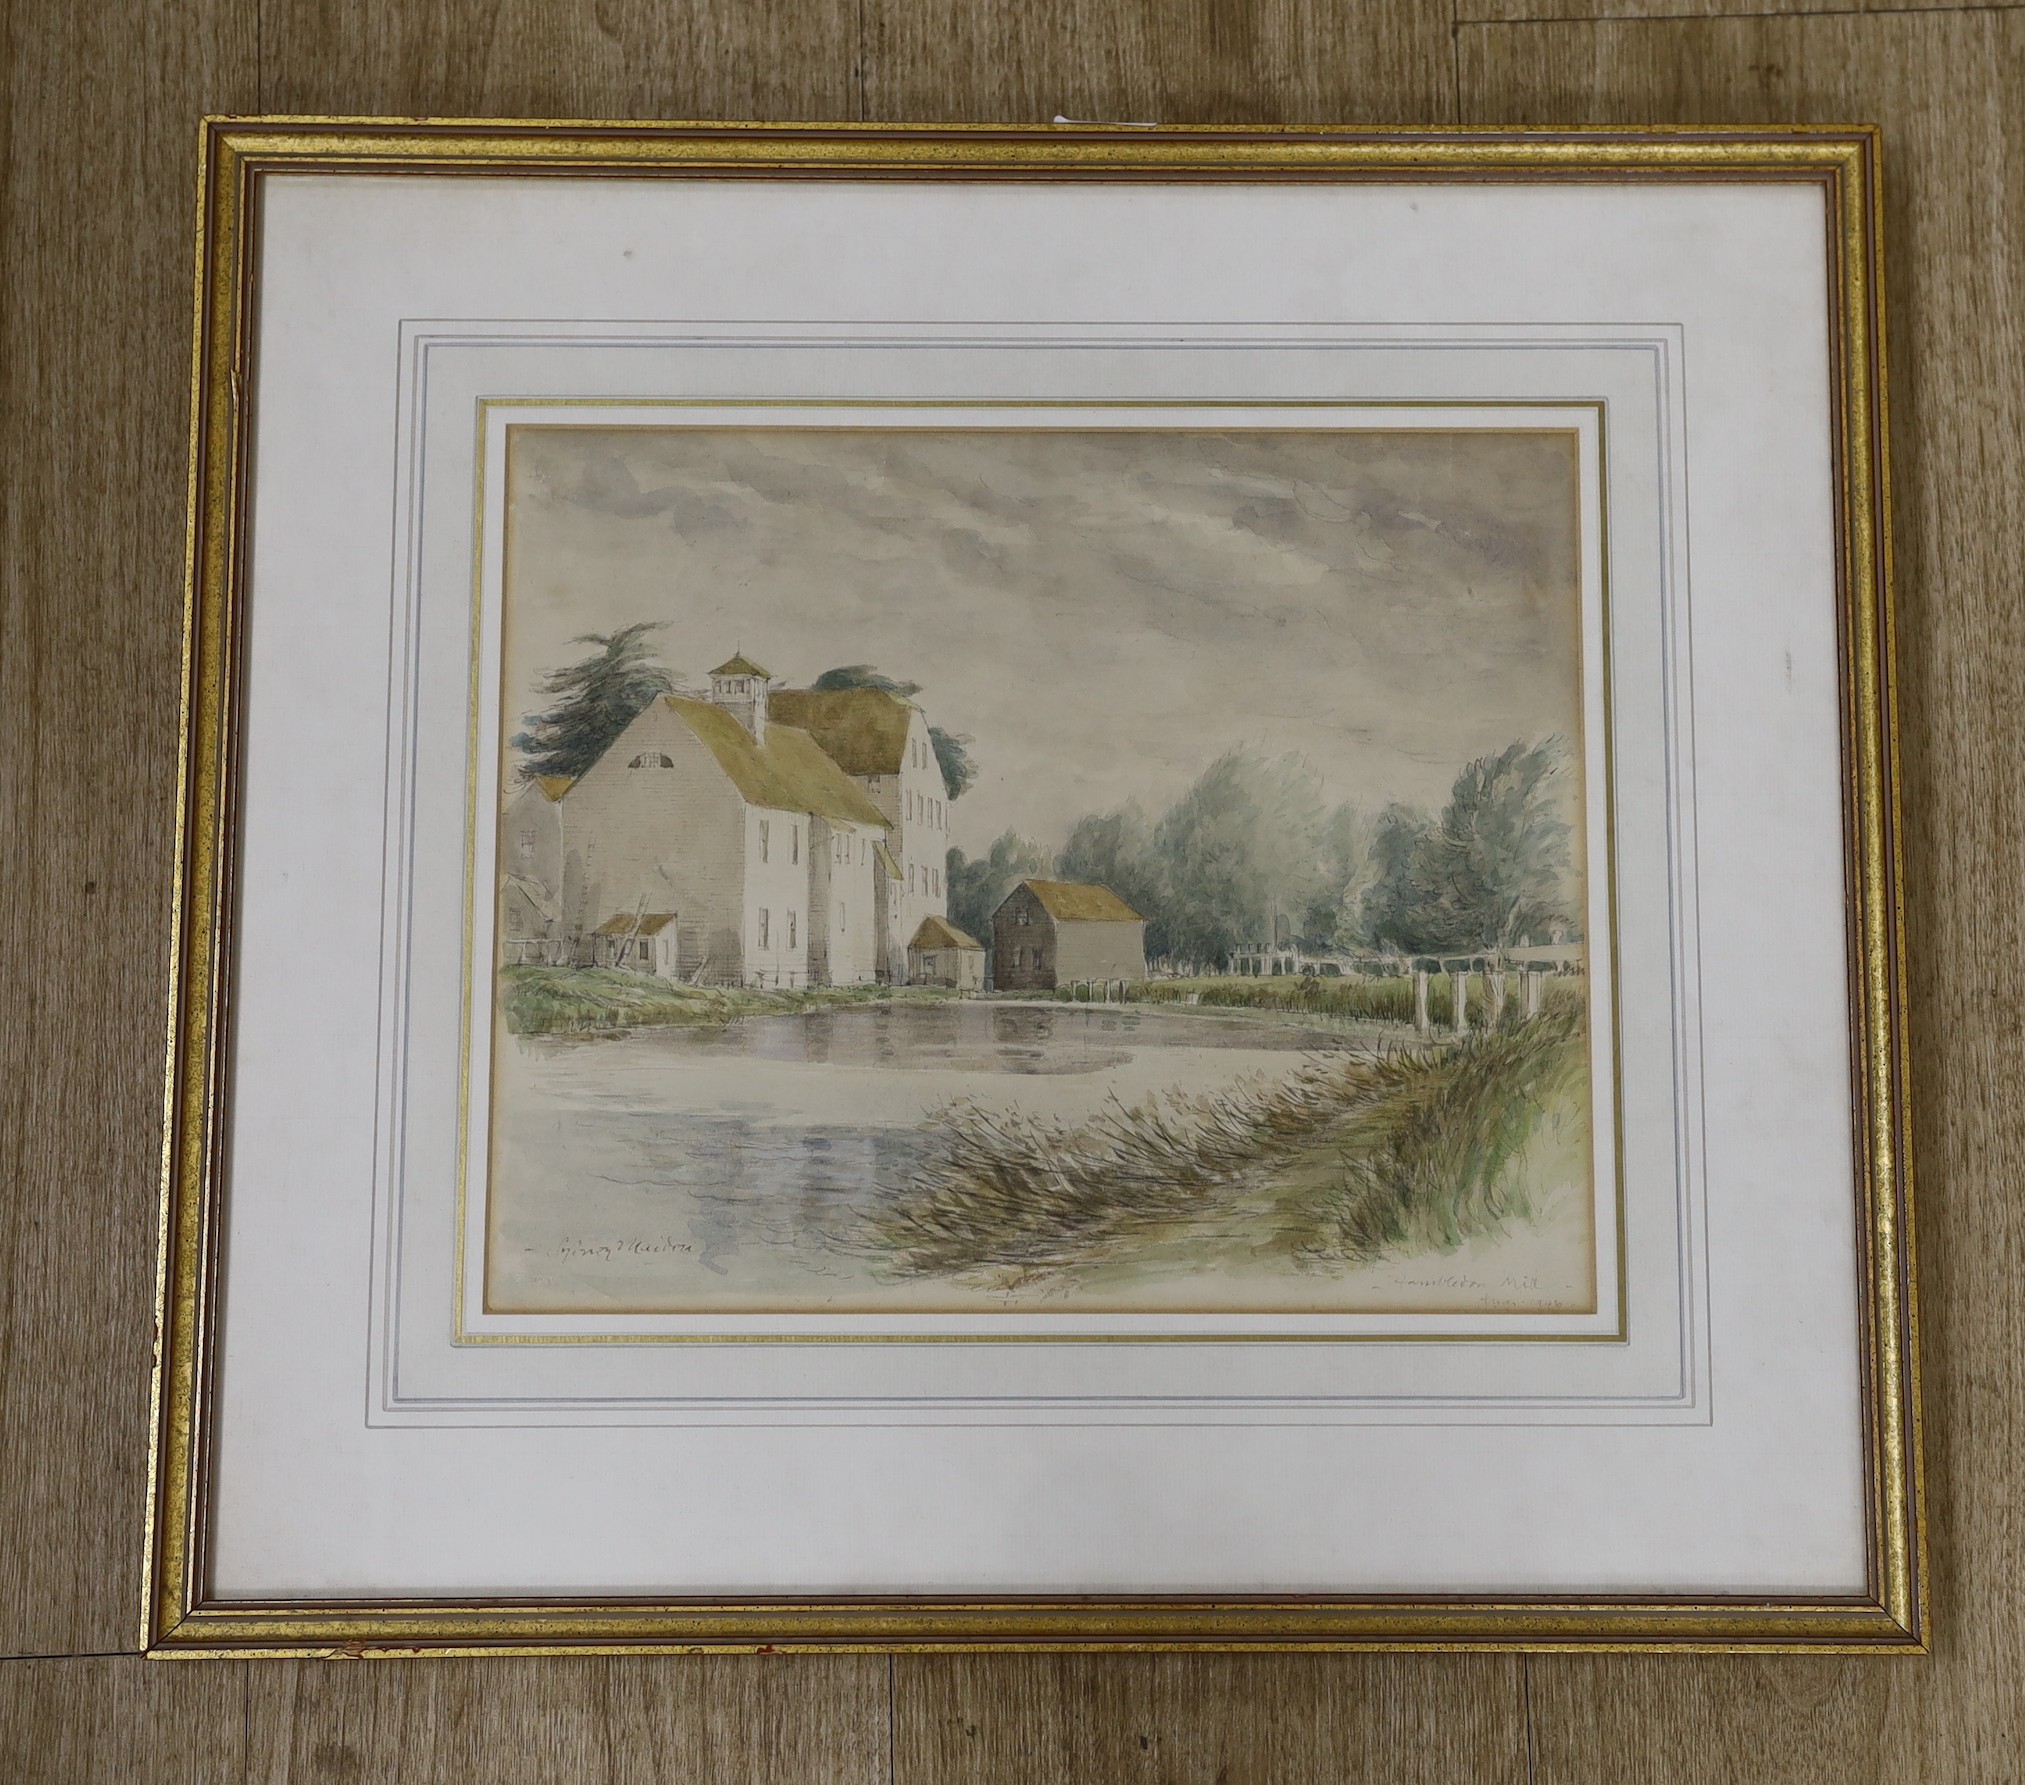 Sydney Maiden (1893-1963), watercolour, 'Hambledon Mill', signed and dated 1946, 26 x 32cm